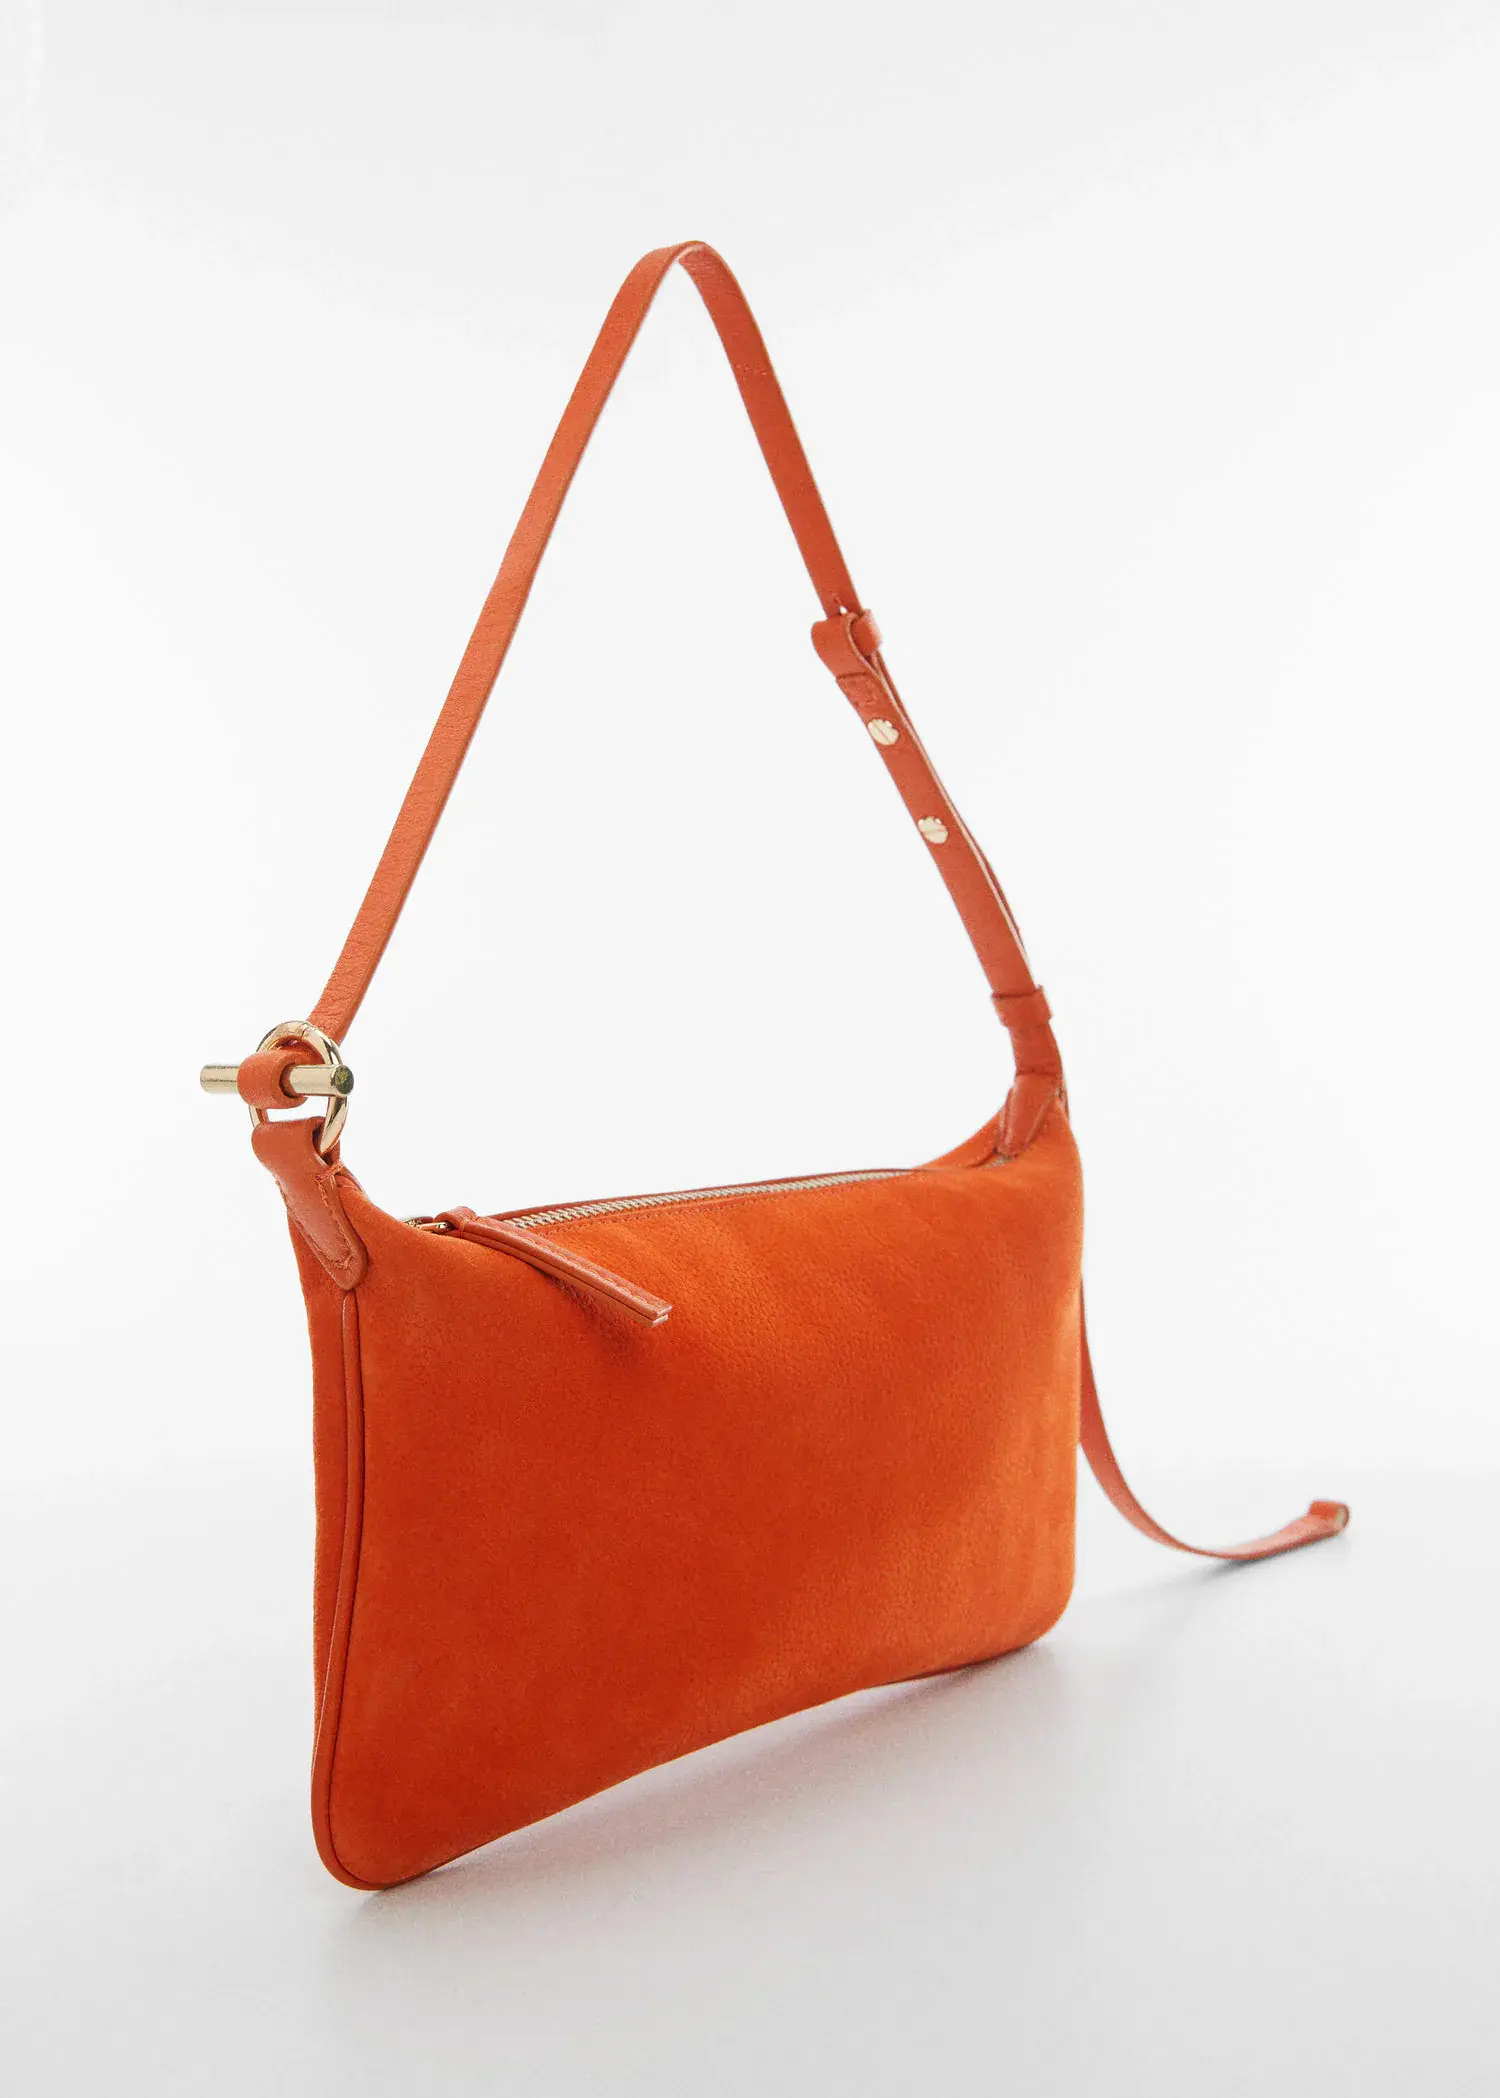 Mango Leather bag with metallic detail. an orange purse is shown on a white surface. 